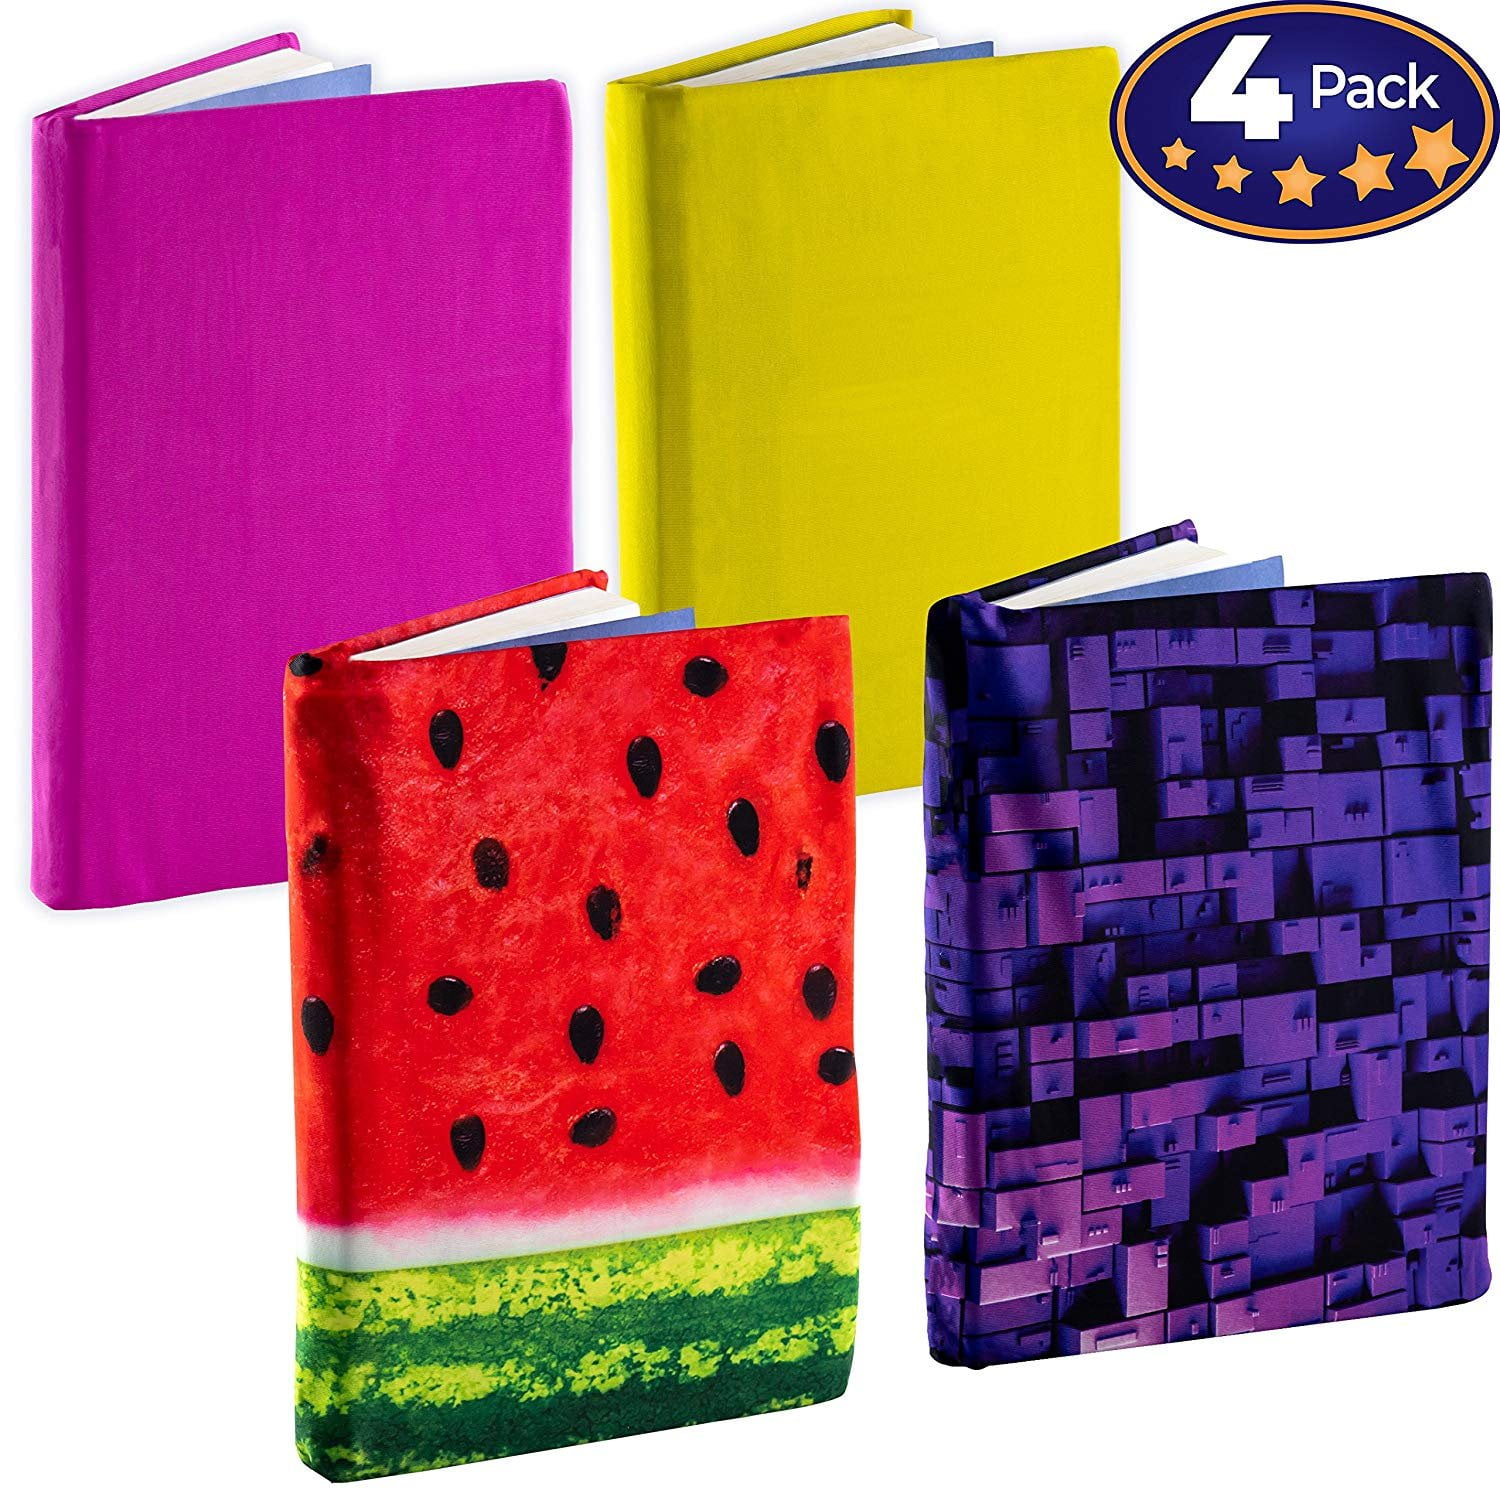 Fits Most Hardcover Textbooks up to 9 x 11 Adhesive-Free Stretchable Book Cover Color 4 Pack Bold 2 Jumbo Nylon Fabric Protectors are A Needed School Supply for Students. 